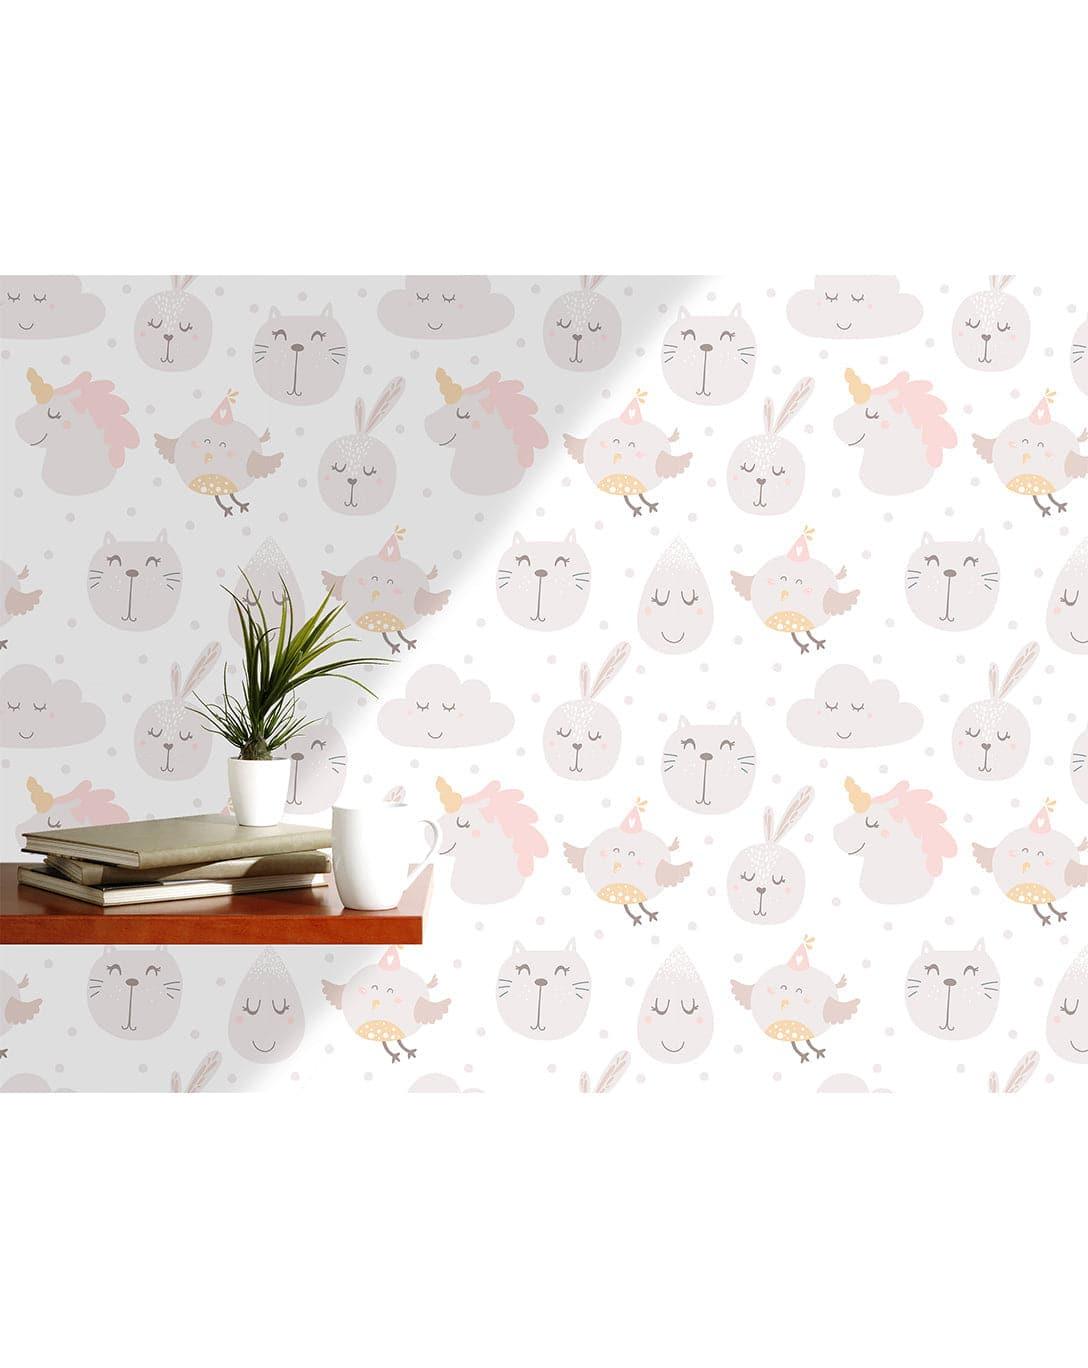 Pastel Color Cute Animals Kids Room Removable Wallpaper 